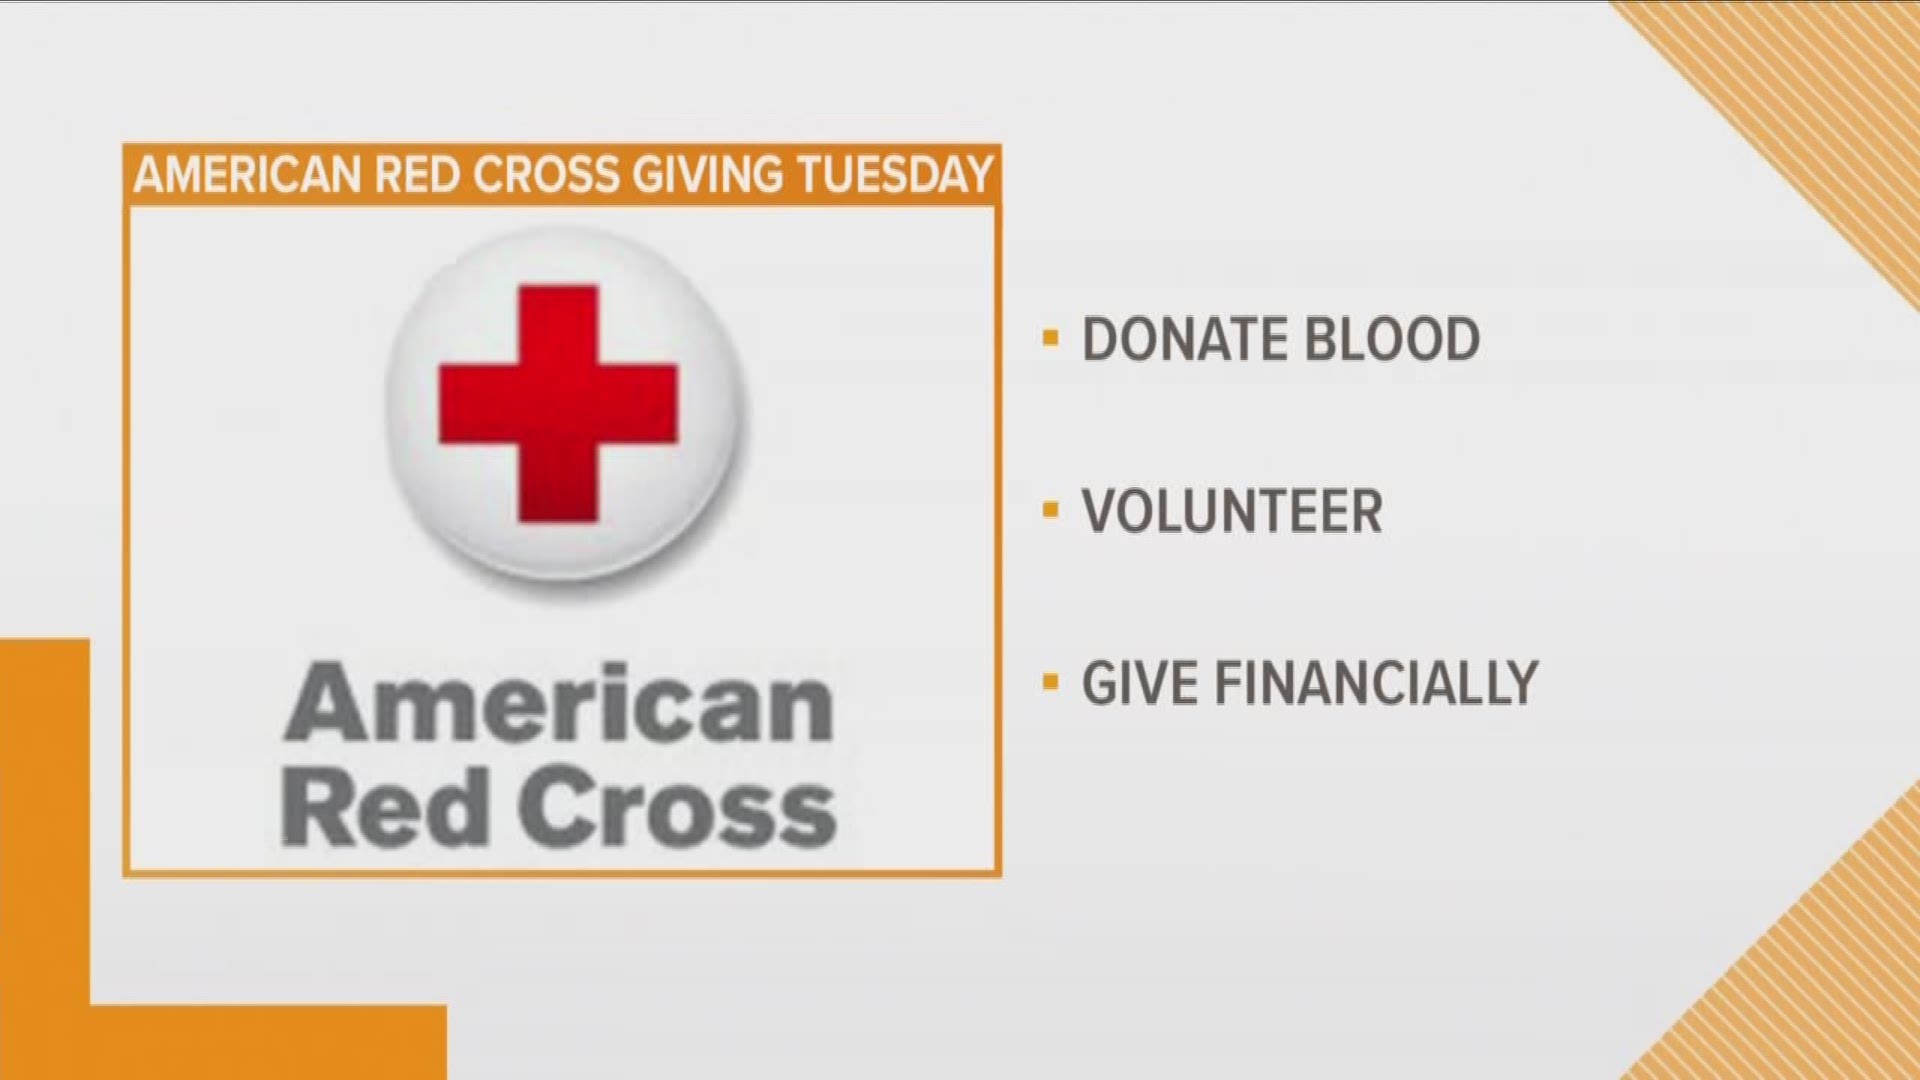 Here's How You Can Support The American Red Cross On Giving Tuesday